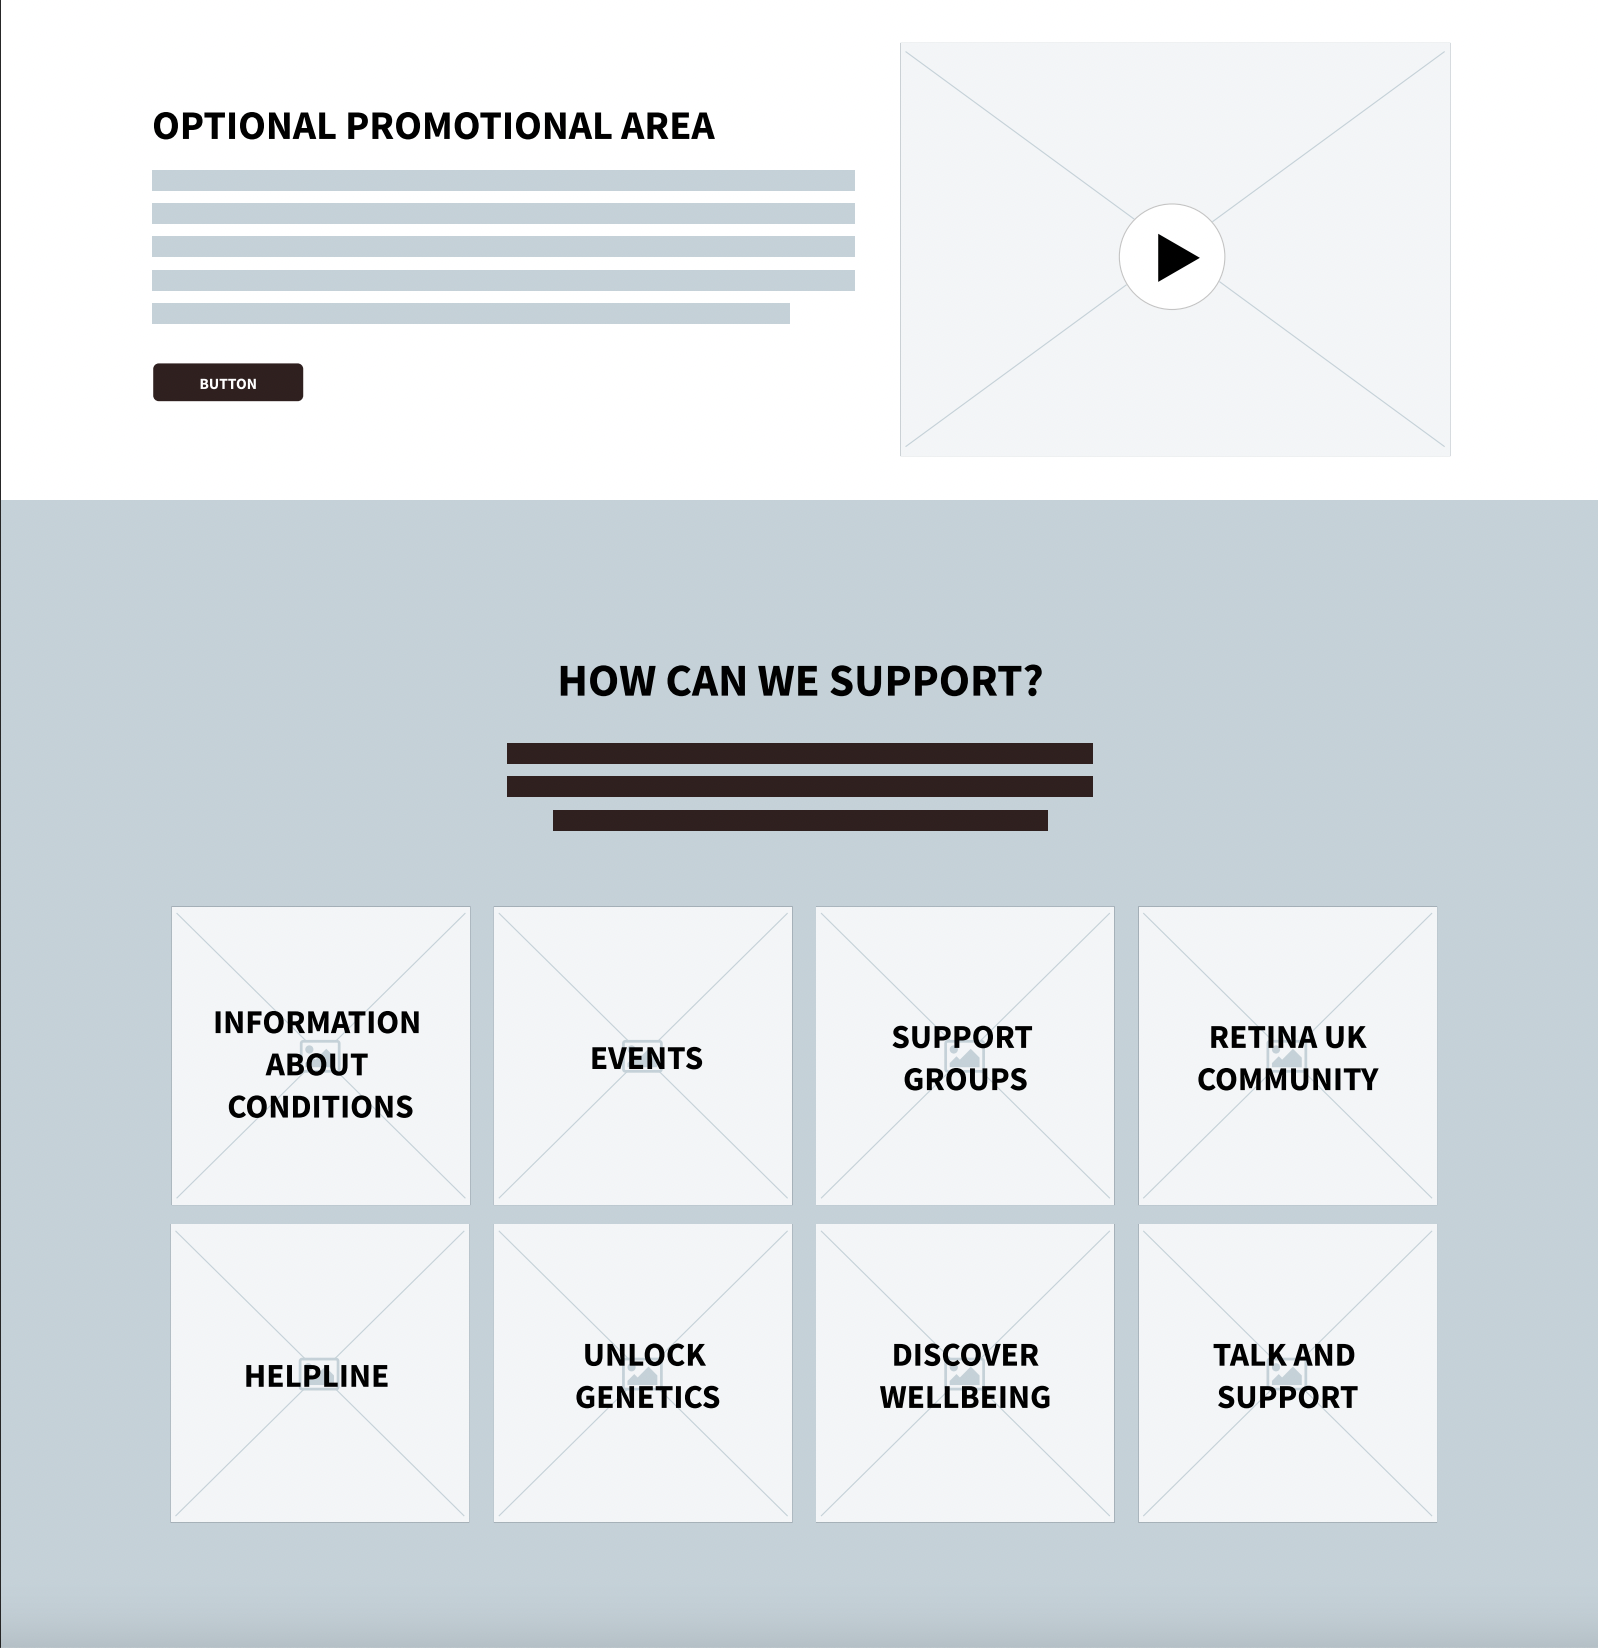 An image of wireframes for the site, including an optional promotional area and "How can we support?" gallery tabs